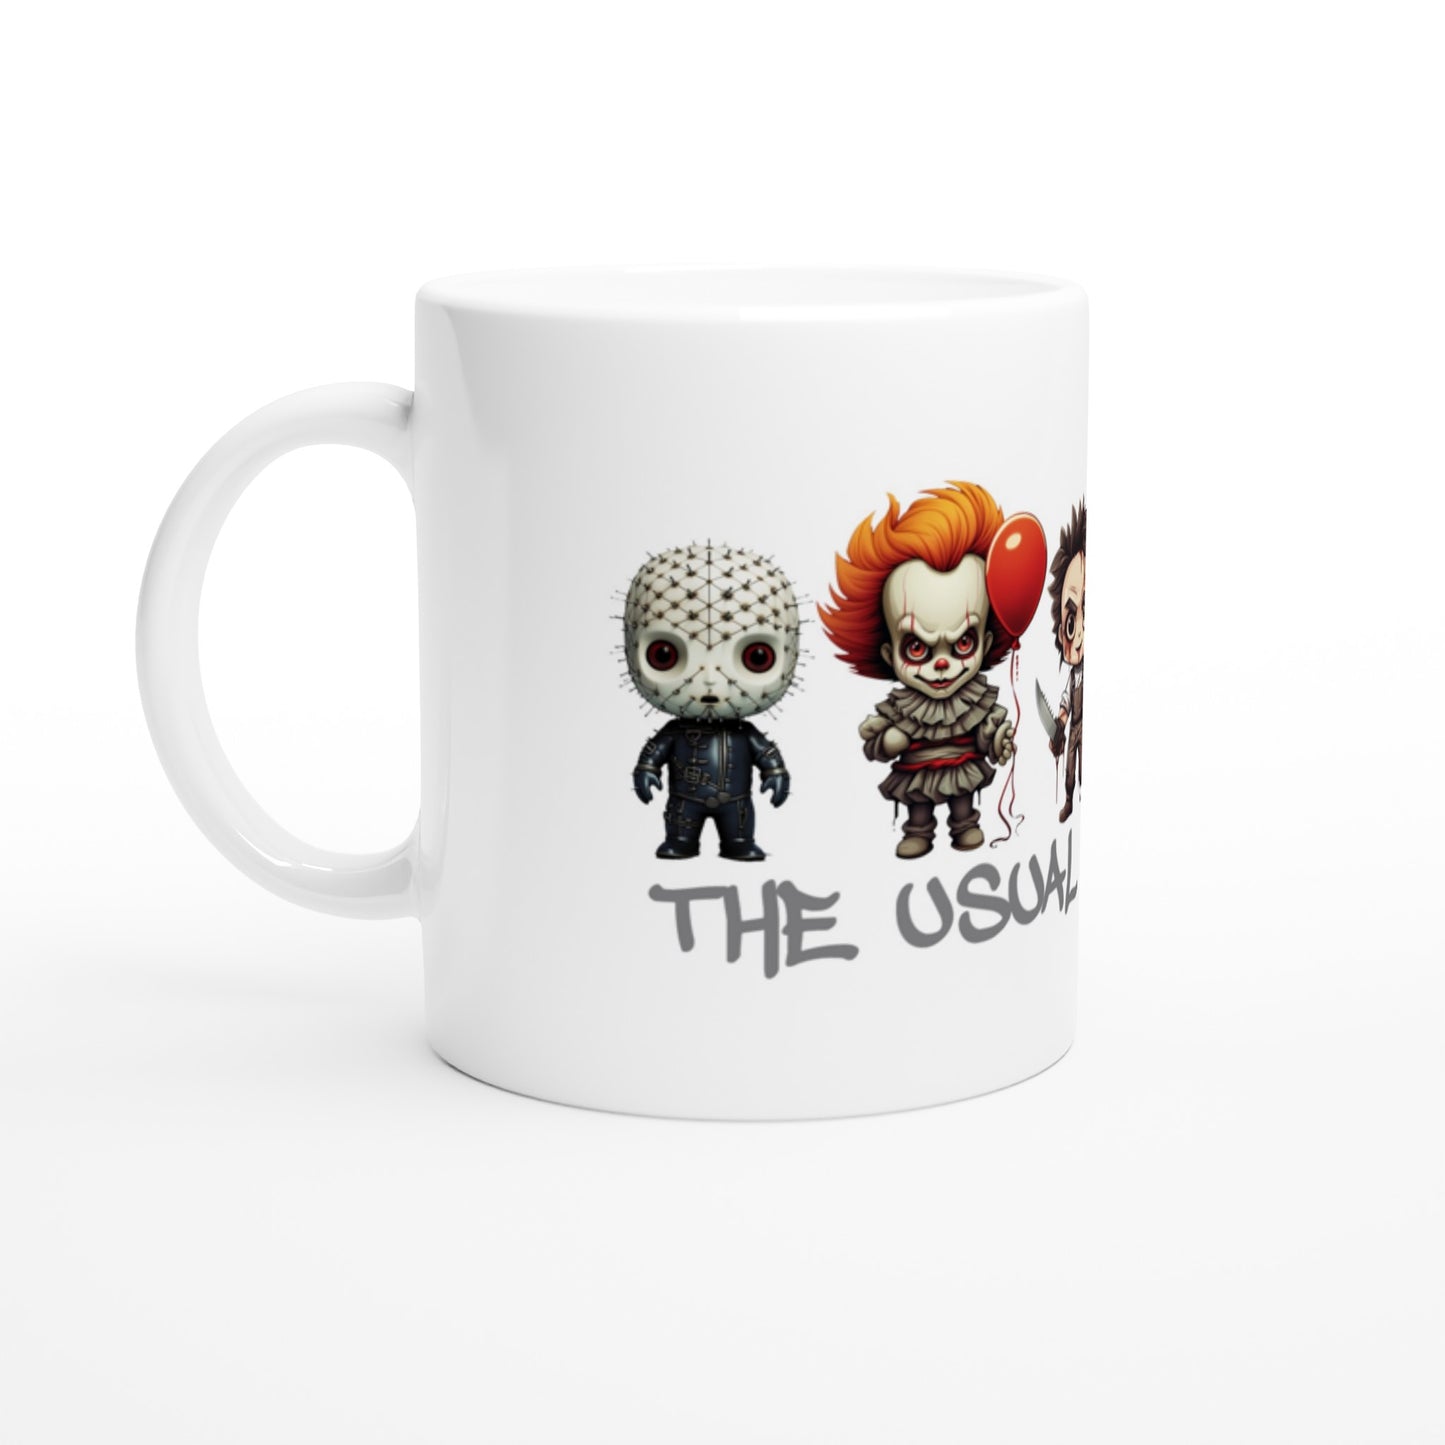 Spook Up Your Mornings with our Horror's Usual Suspects 11oz Ceramic Mug! Clothes by Tobey Alexander